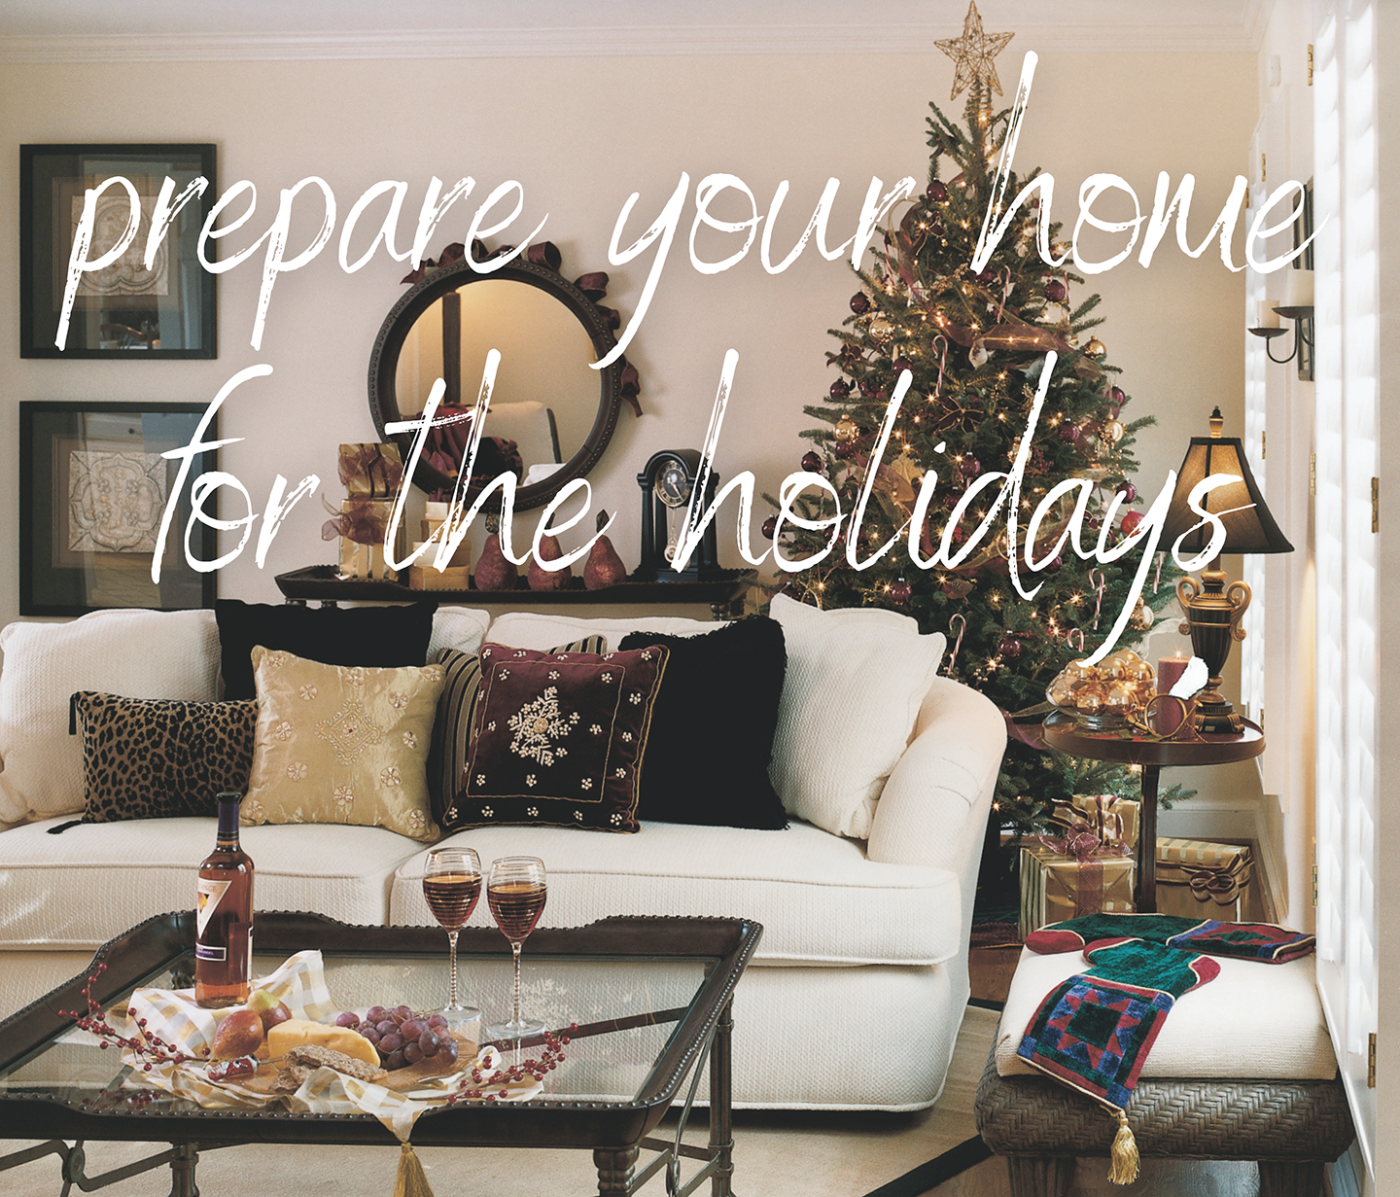 Prepare Your Home For the Holidays